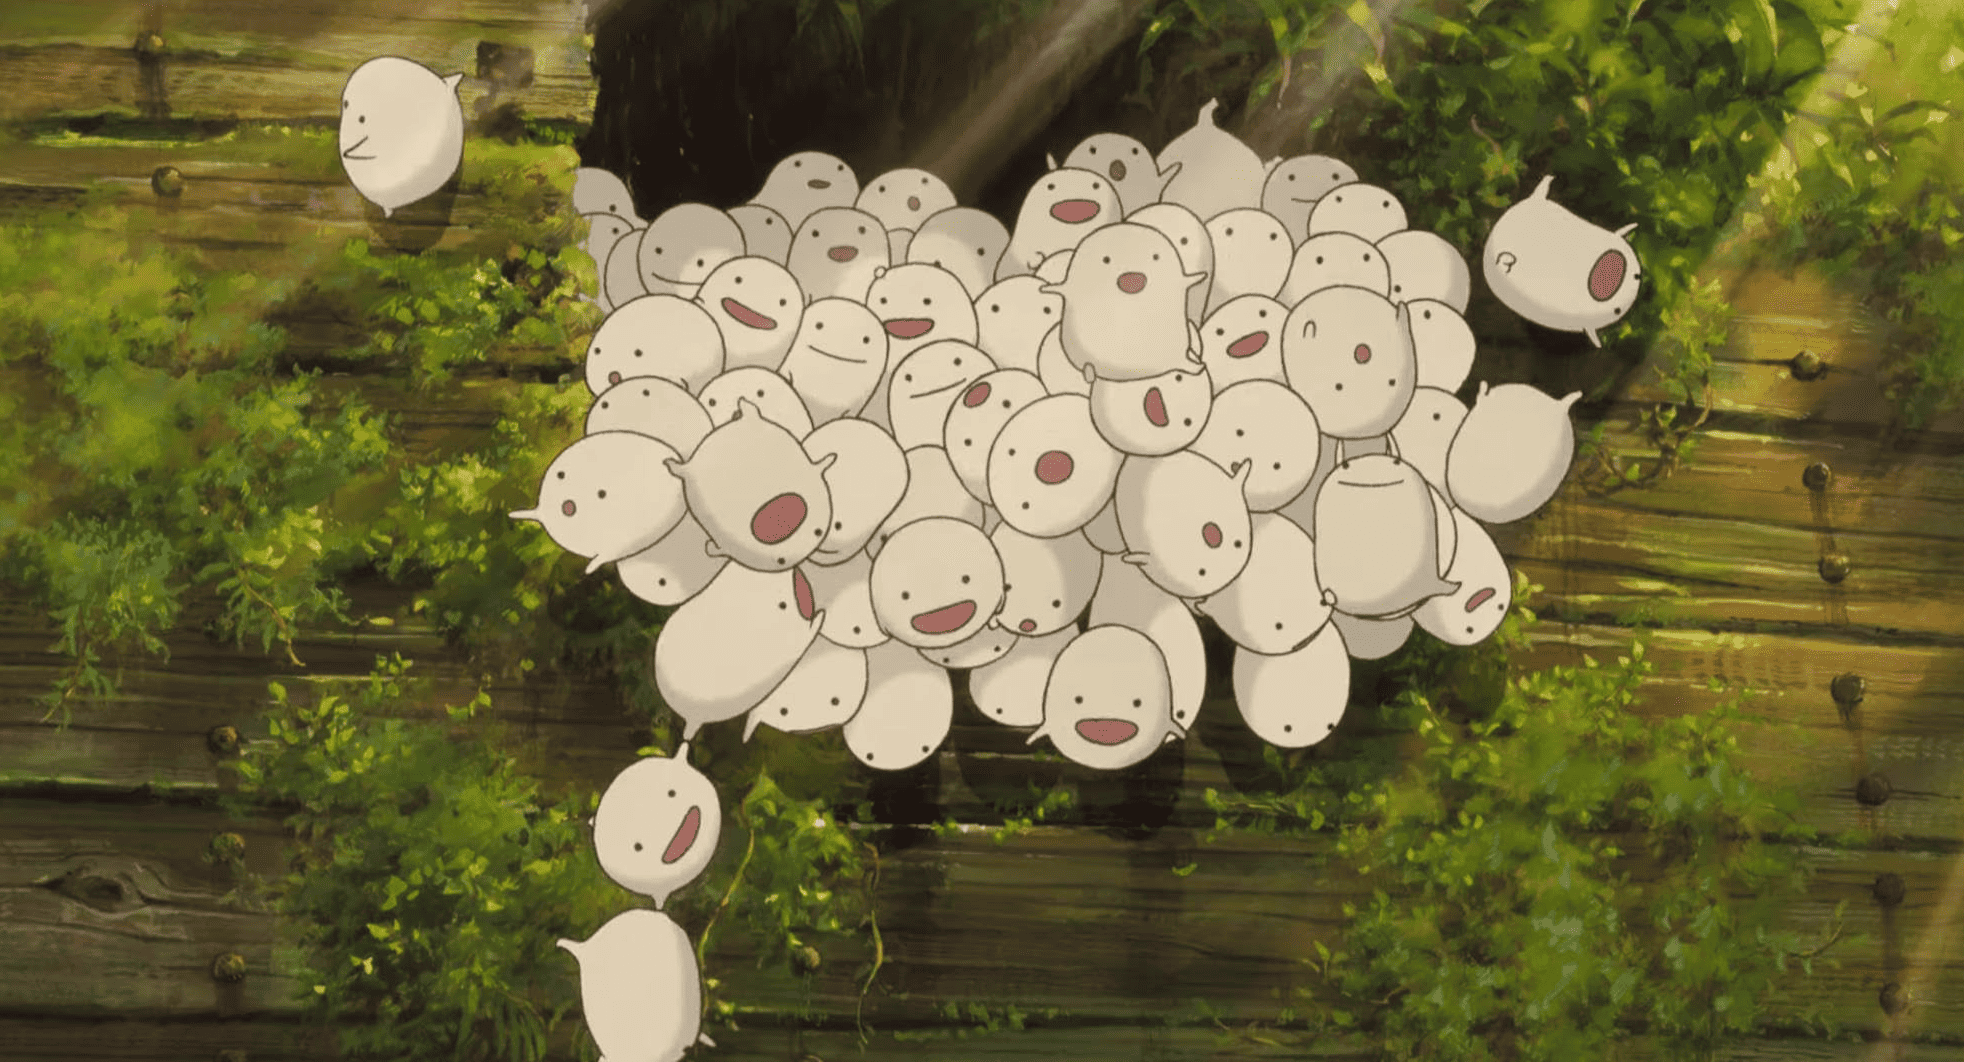 An animated group of small, round creatures exits through a hole in this image from Studio Ghibli. 